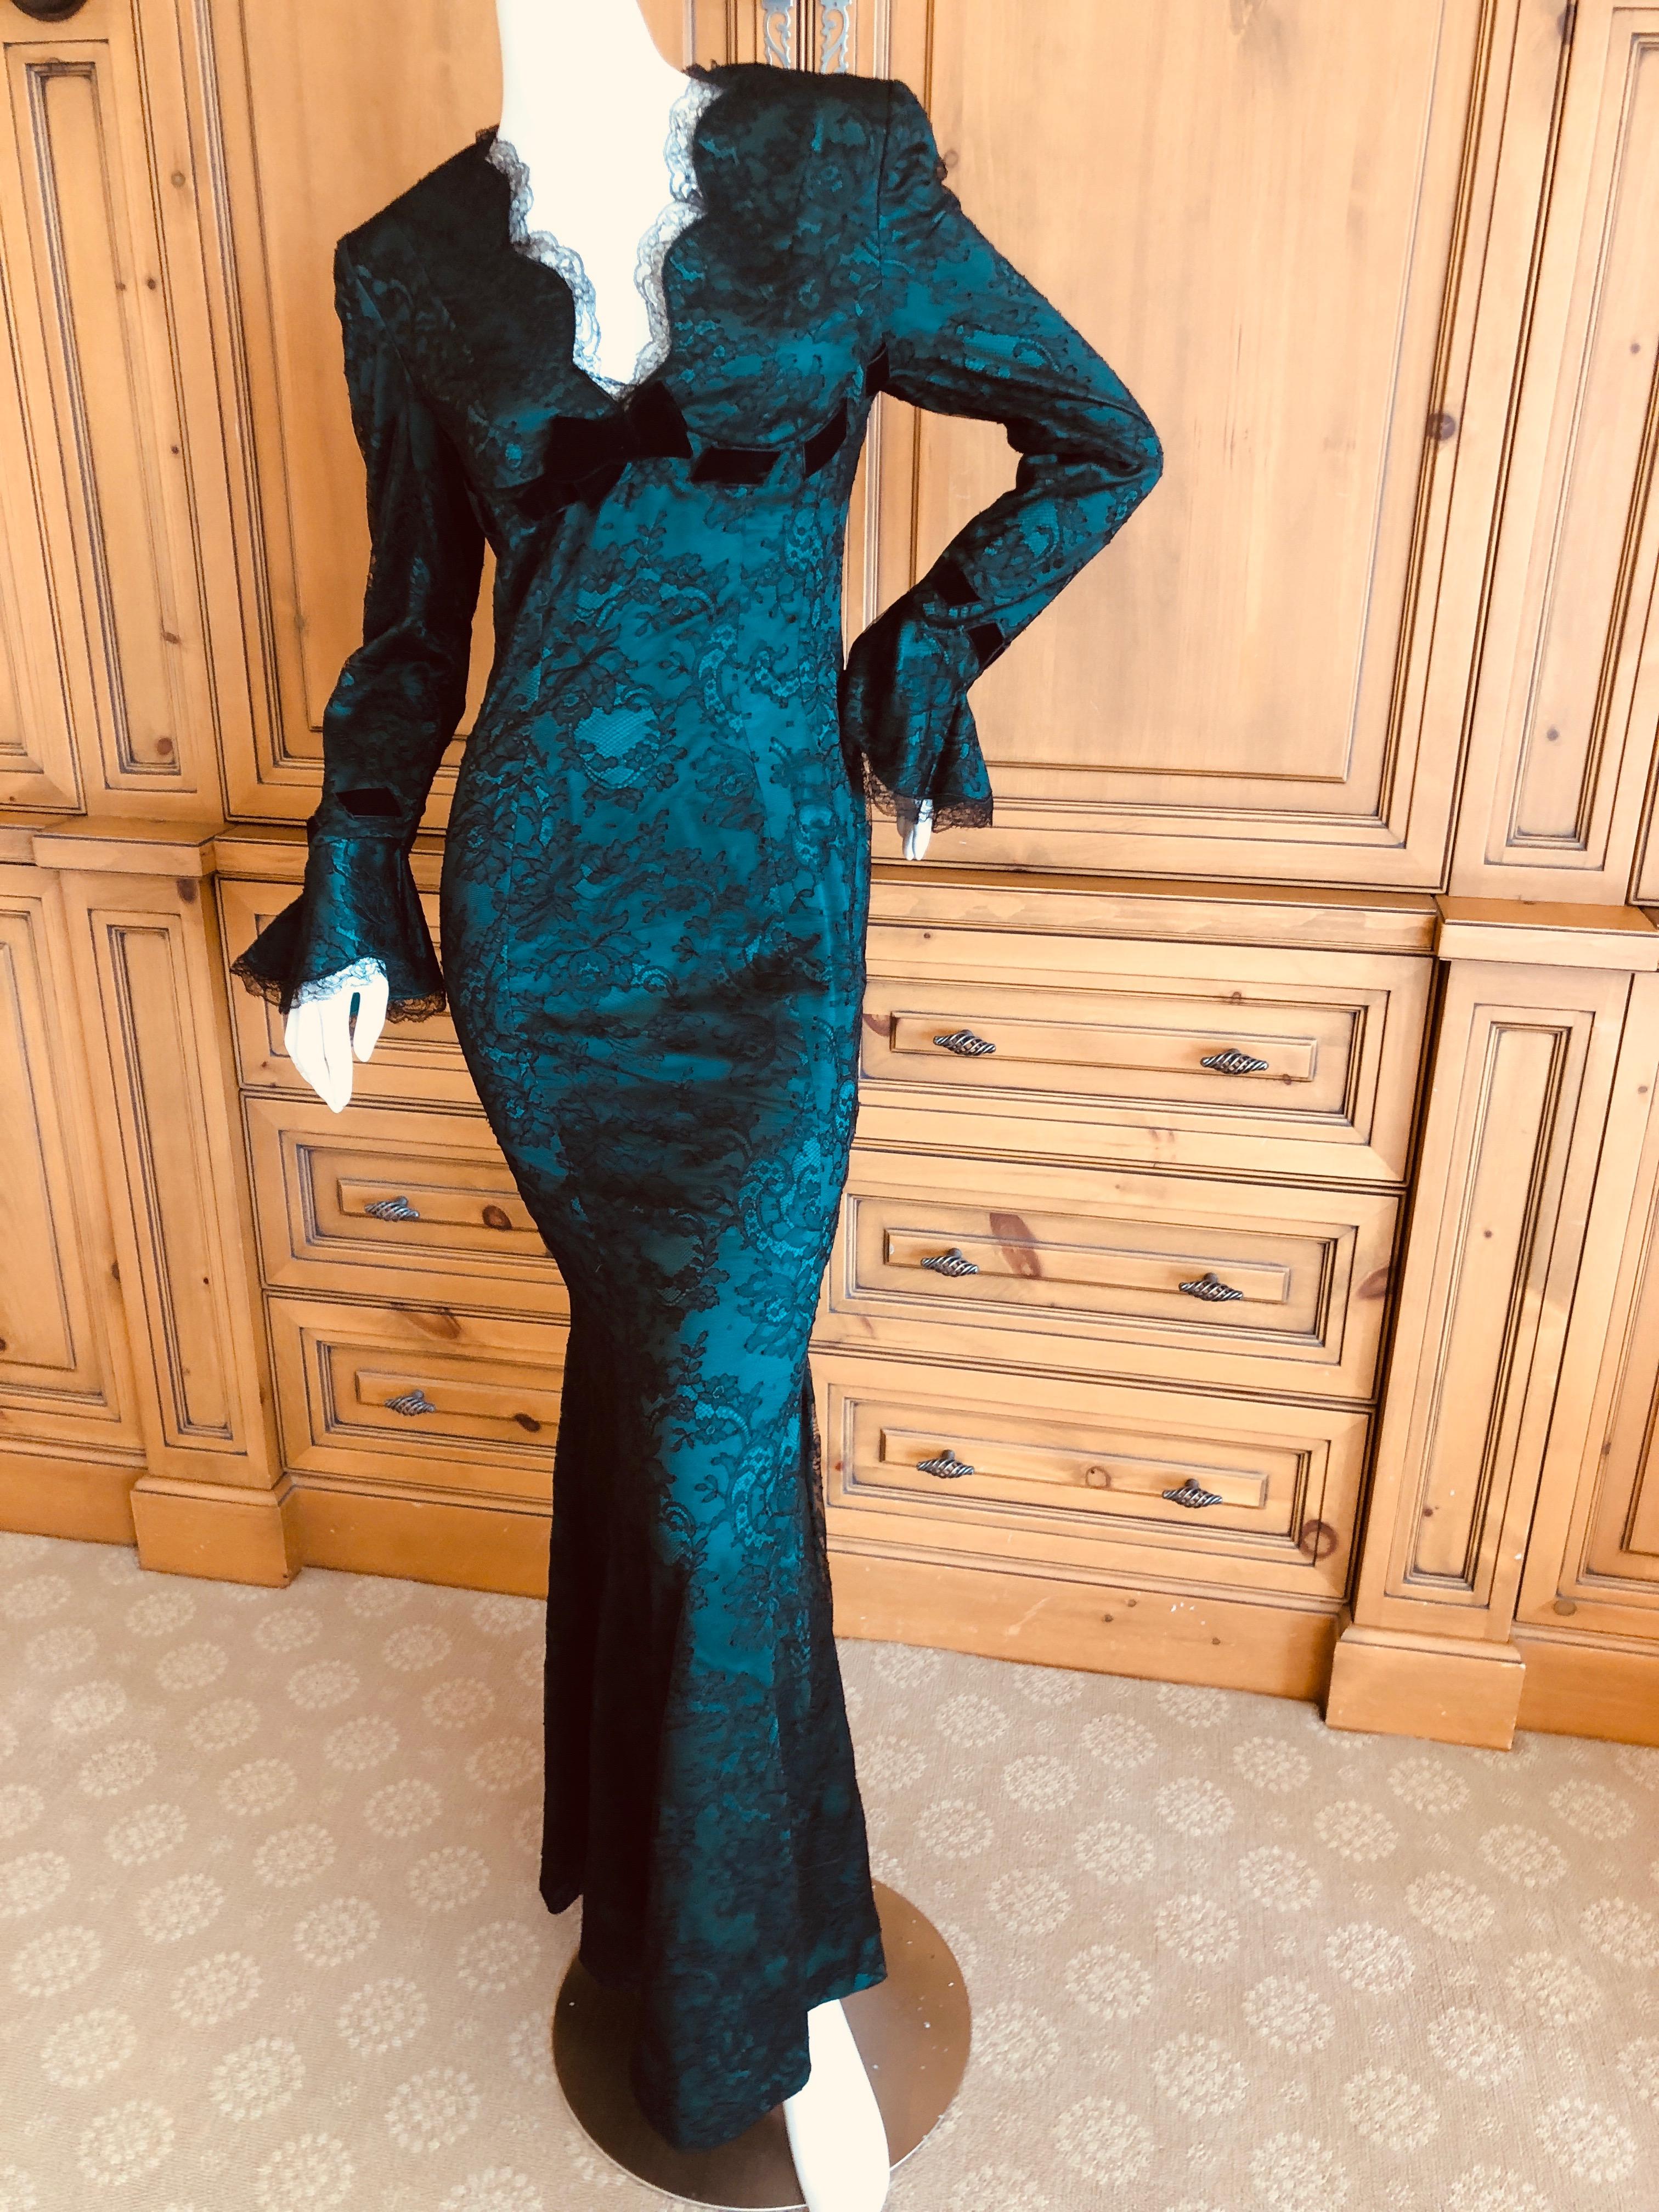 Thierry Mugler Green Vintage 80's Evening Dress with Black Lace Overlay In Excellent Condition For Sale In Cloverdale, CA